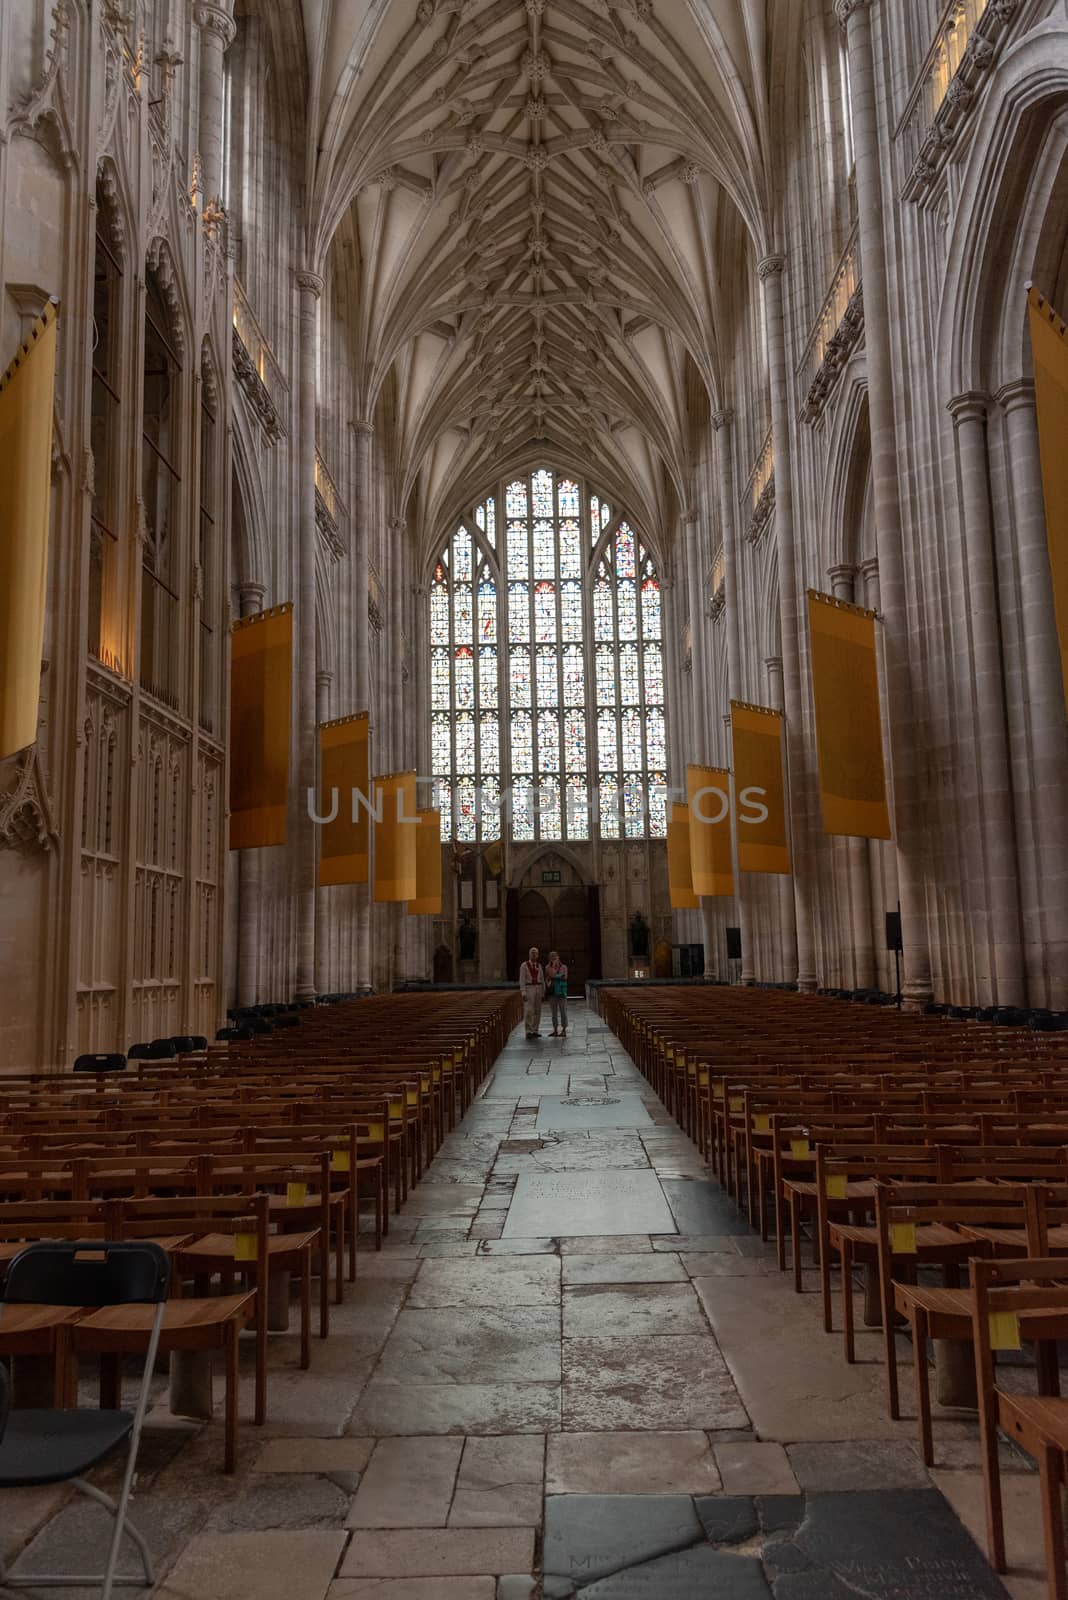 Winchester, England--July 17, 2018. Looking down the center aisle of England's Winchester Cathedral from front to back.